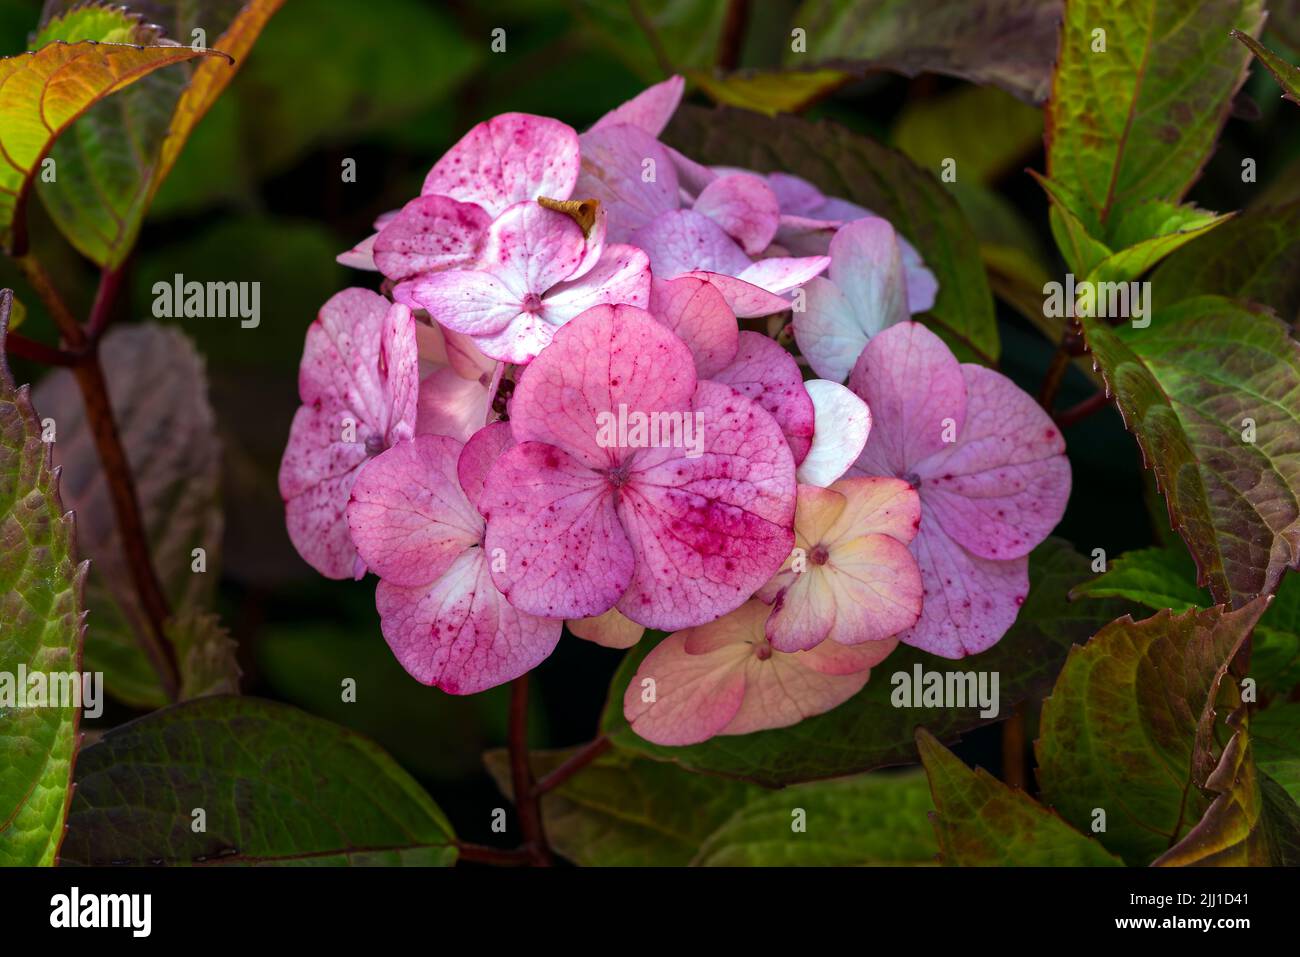 Hydrangea macrophylla 'Preziosa' a summer flowering shrub plant with a pink summertime flower, stock photo image Stock Photo